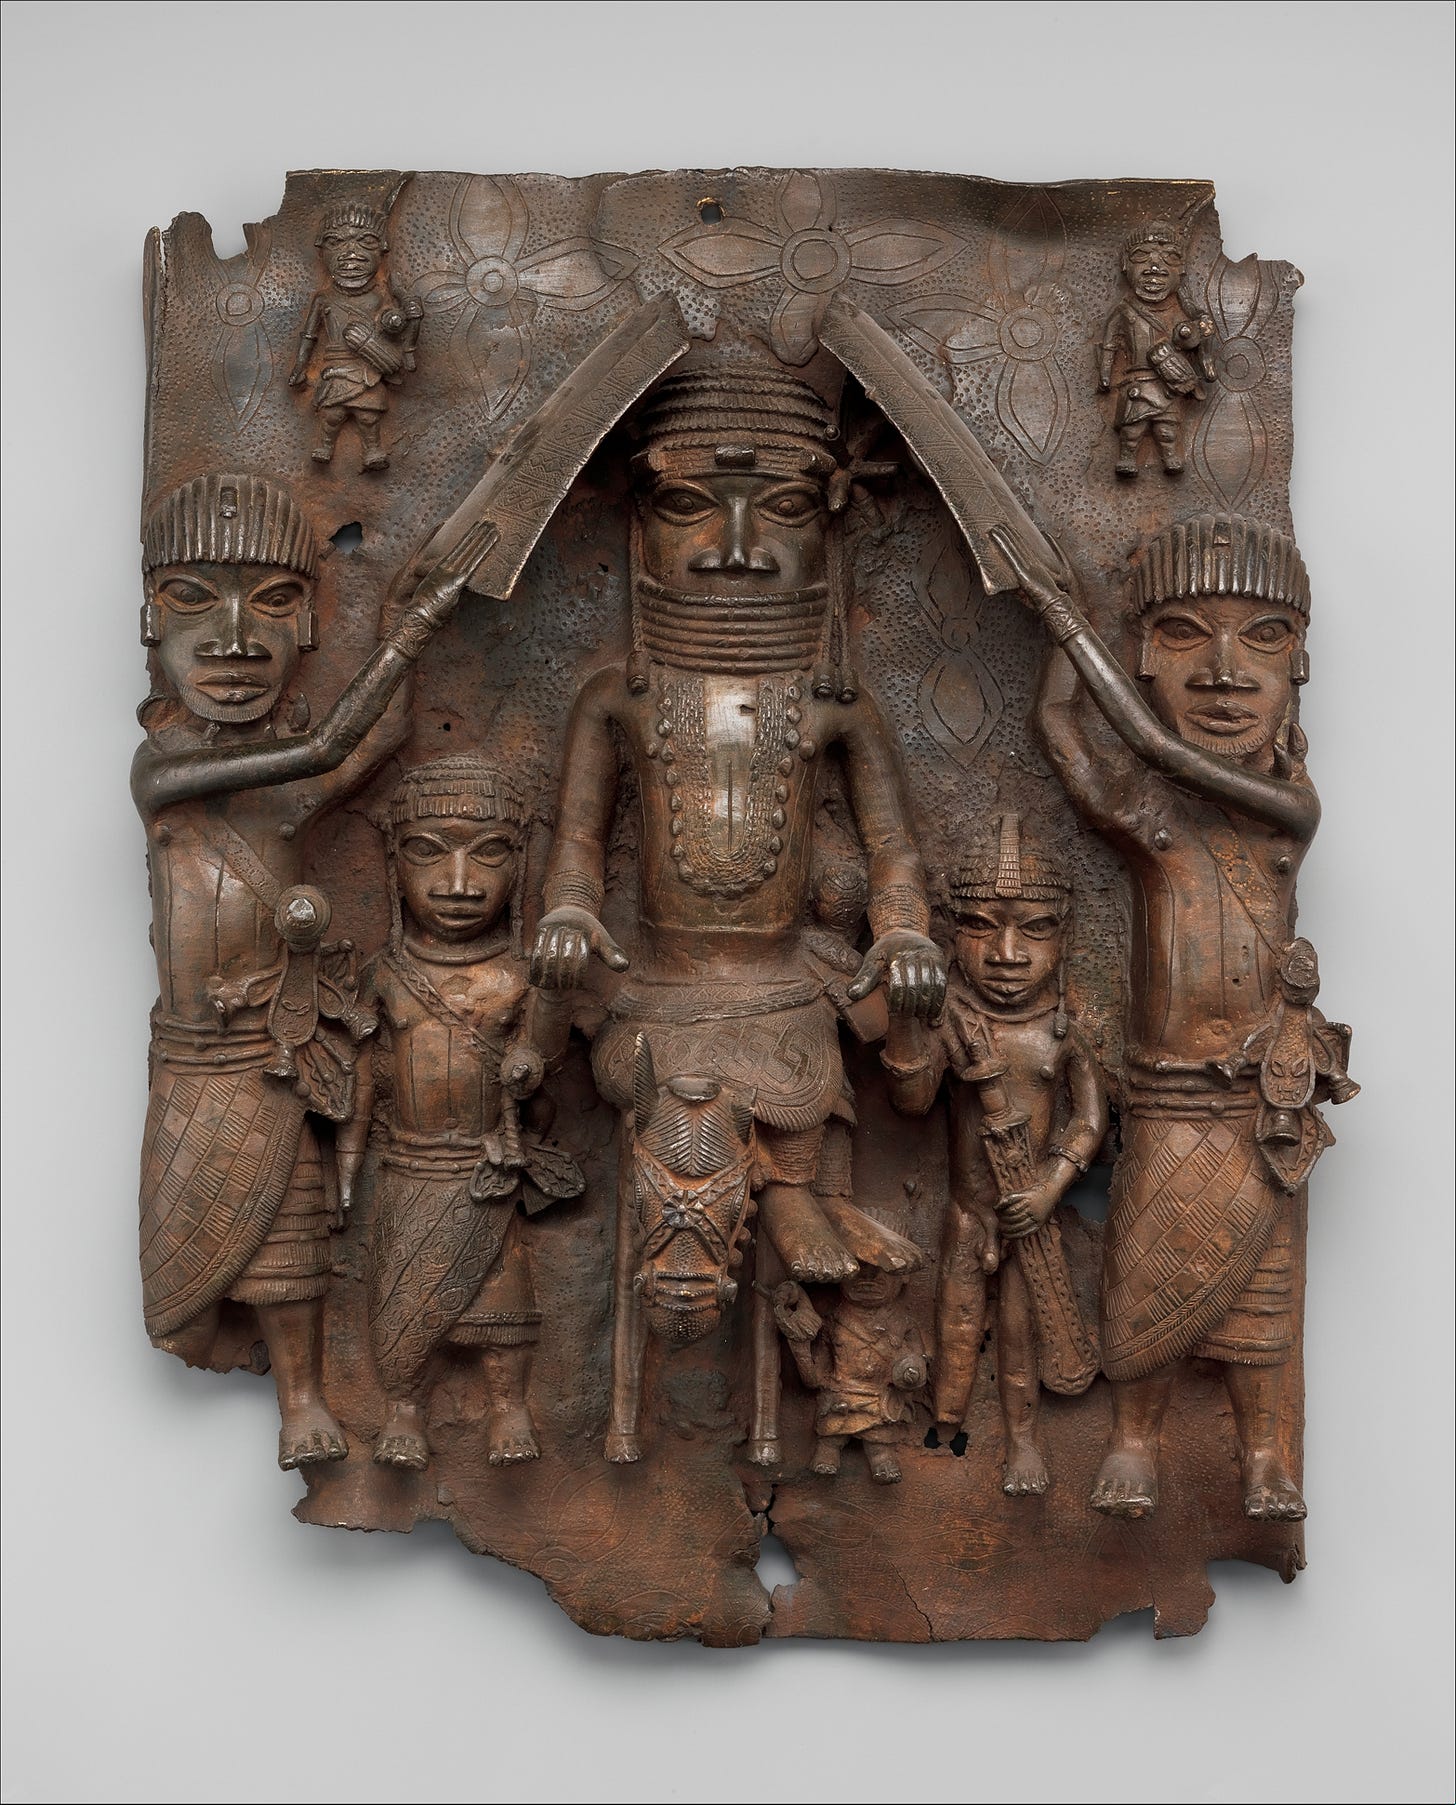 A king on horse is flanked by attendants, progressively smaller to indicate diminished stature in this brass relief artwork.